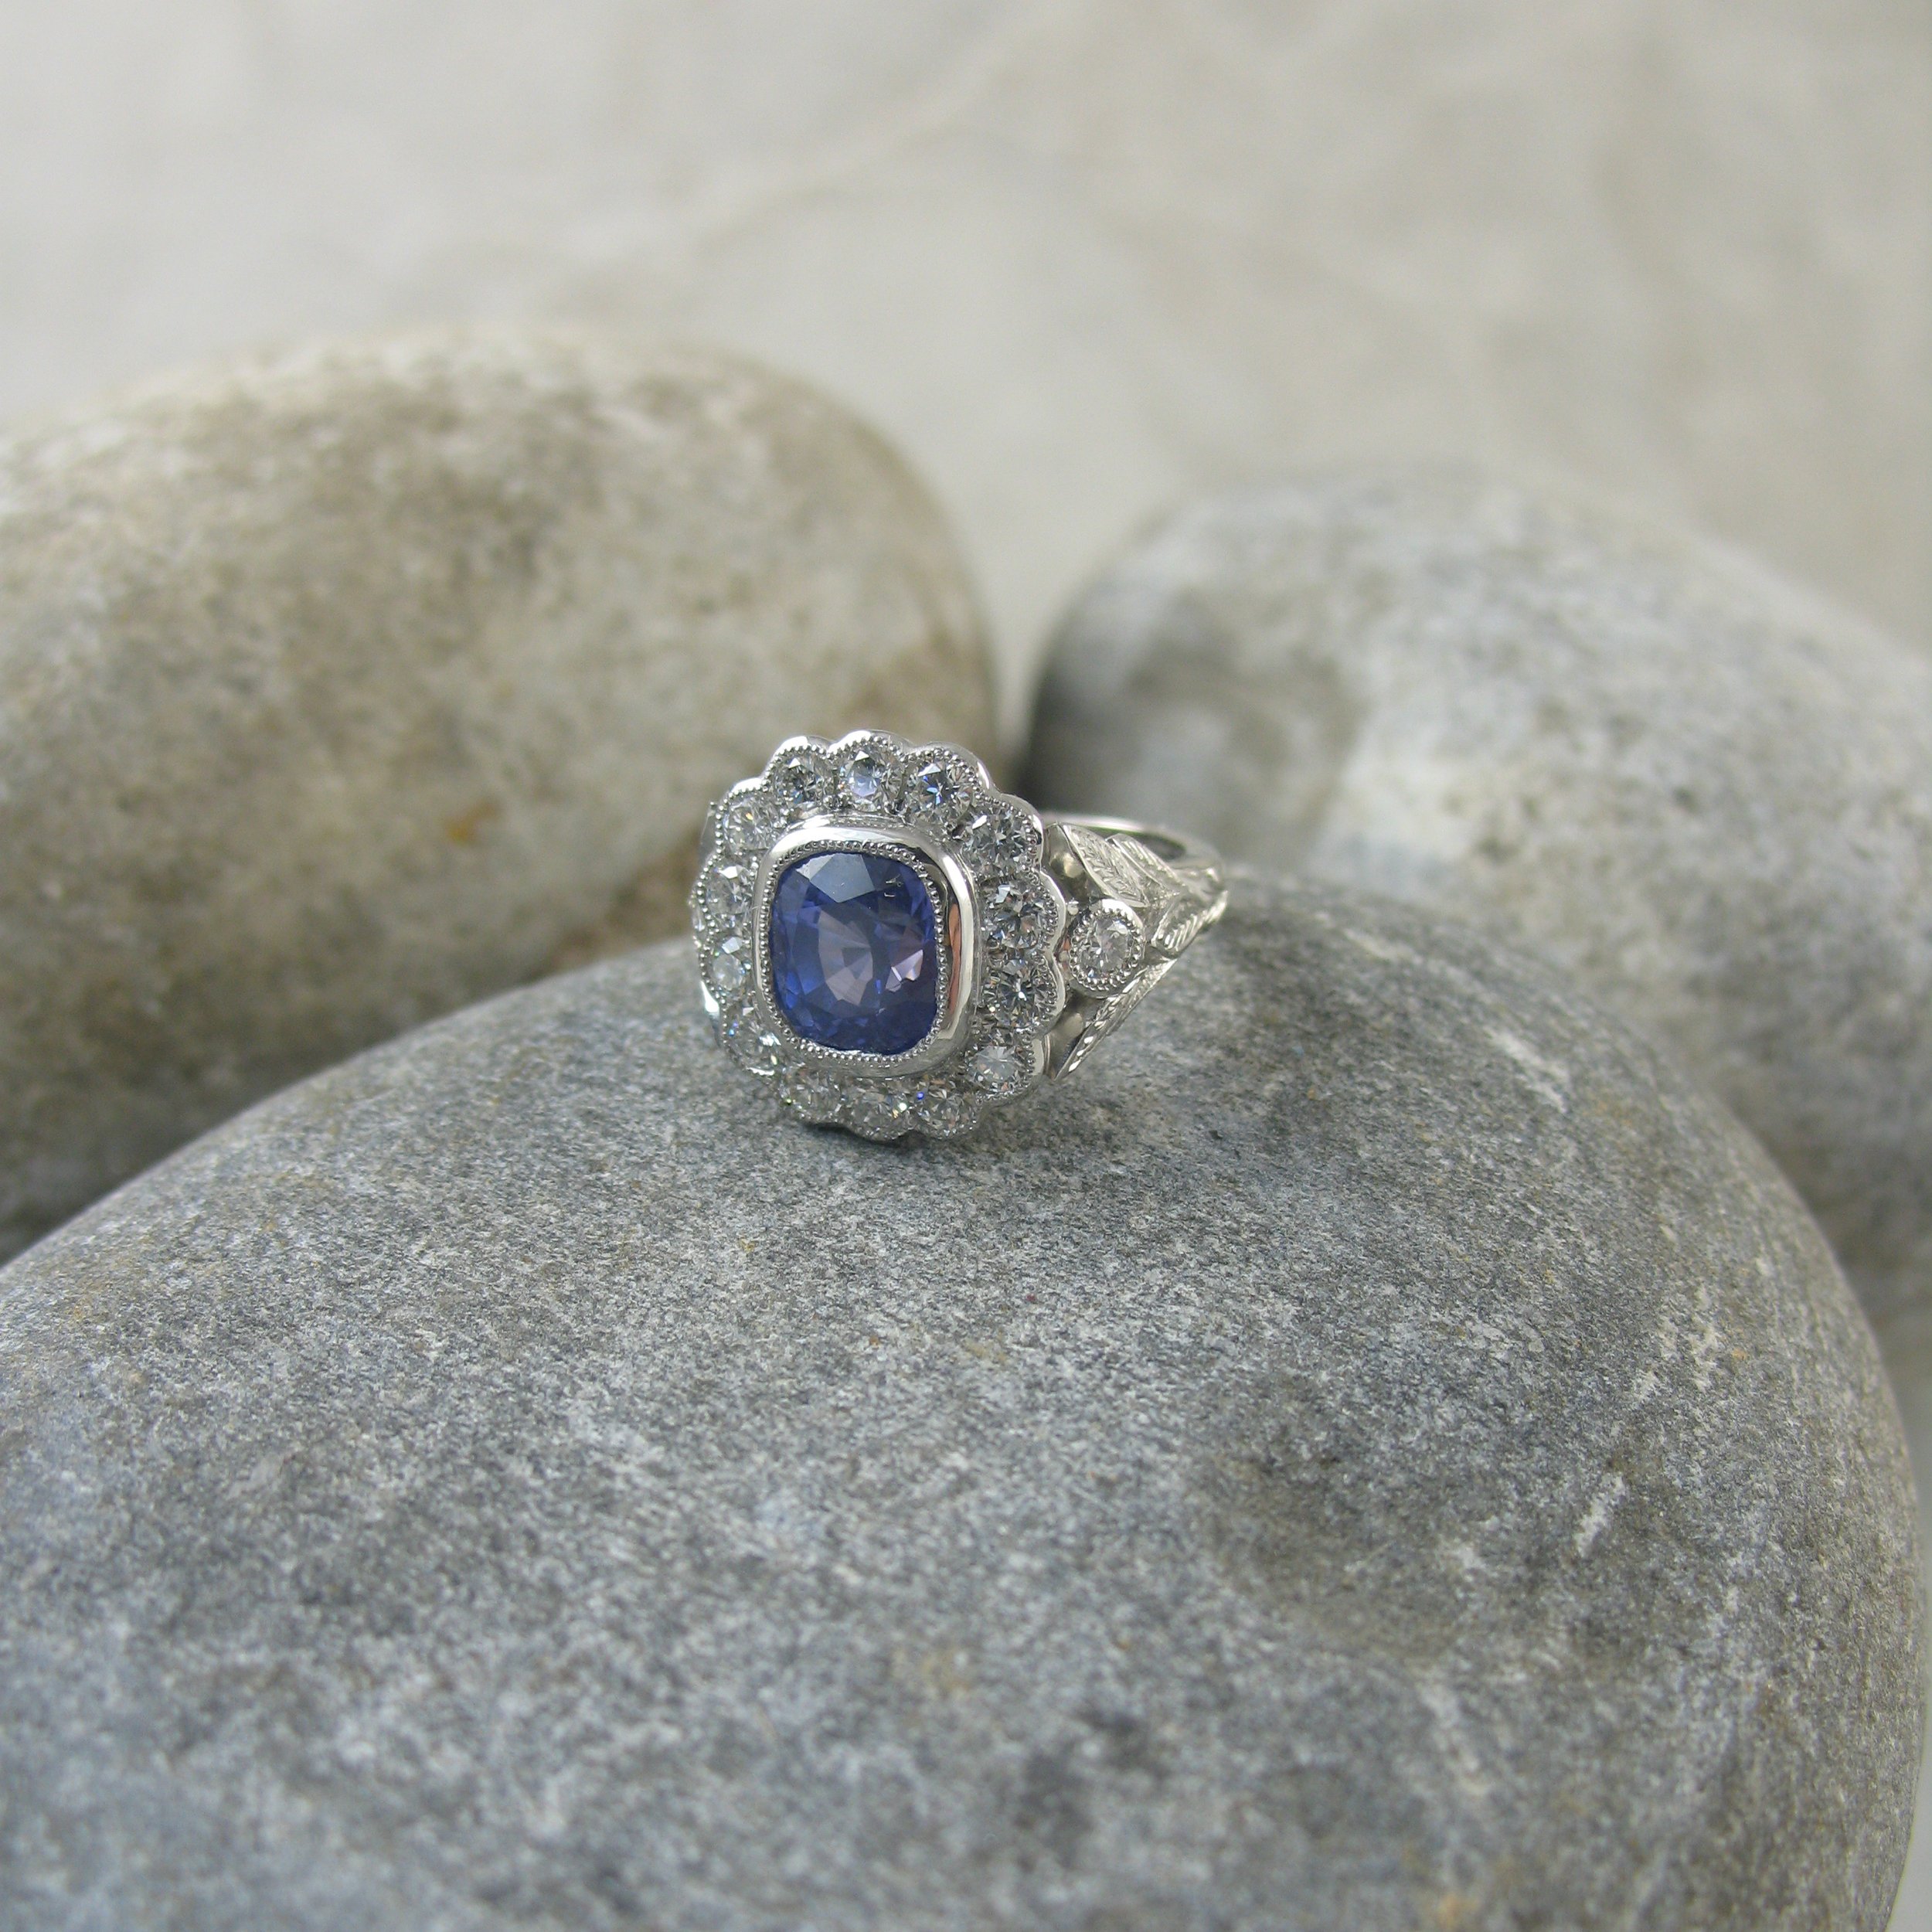 A beautiful vintage inspired bespoke sapphire halo ring